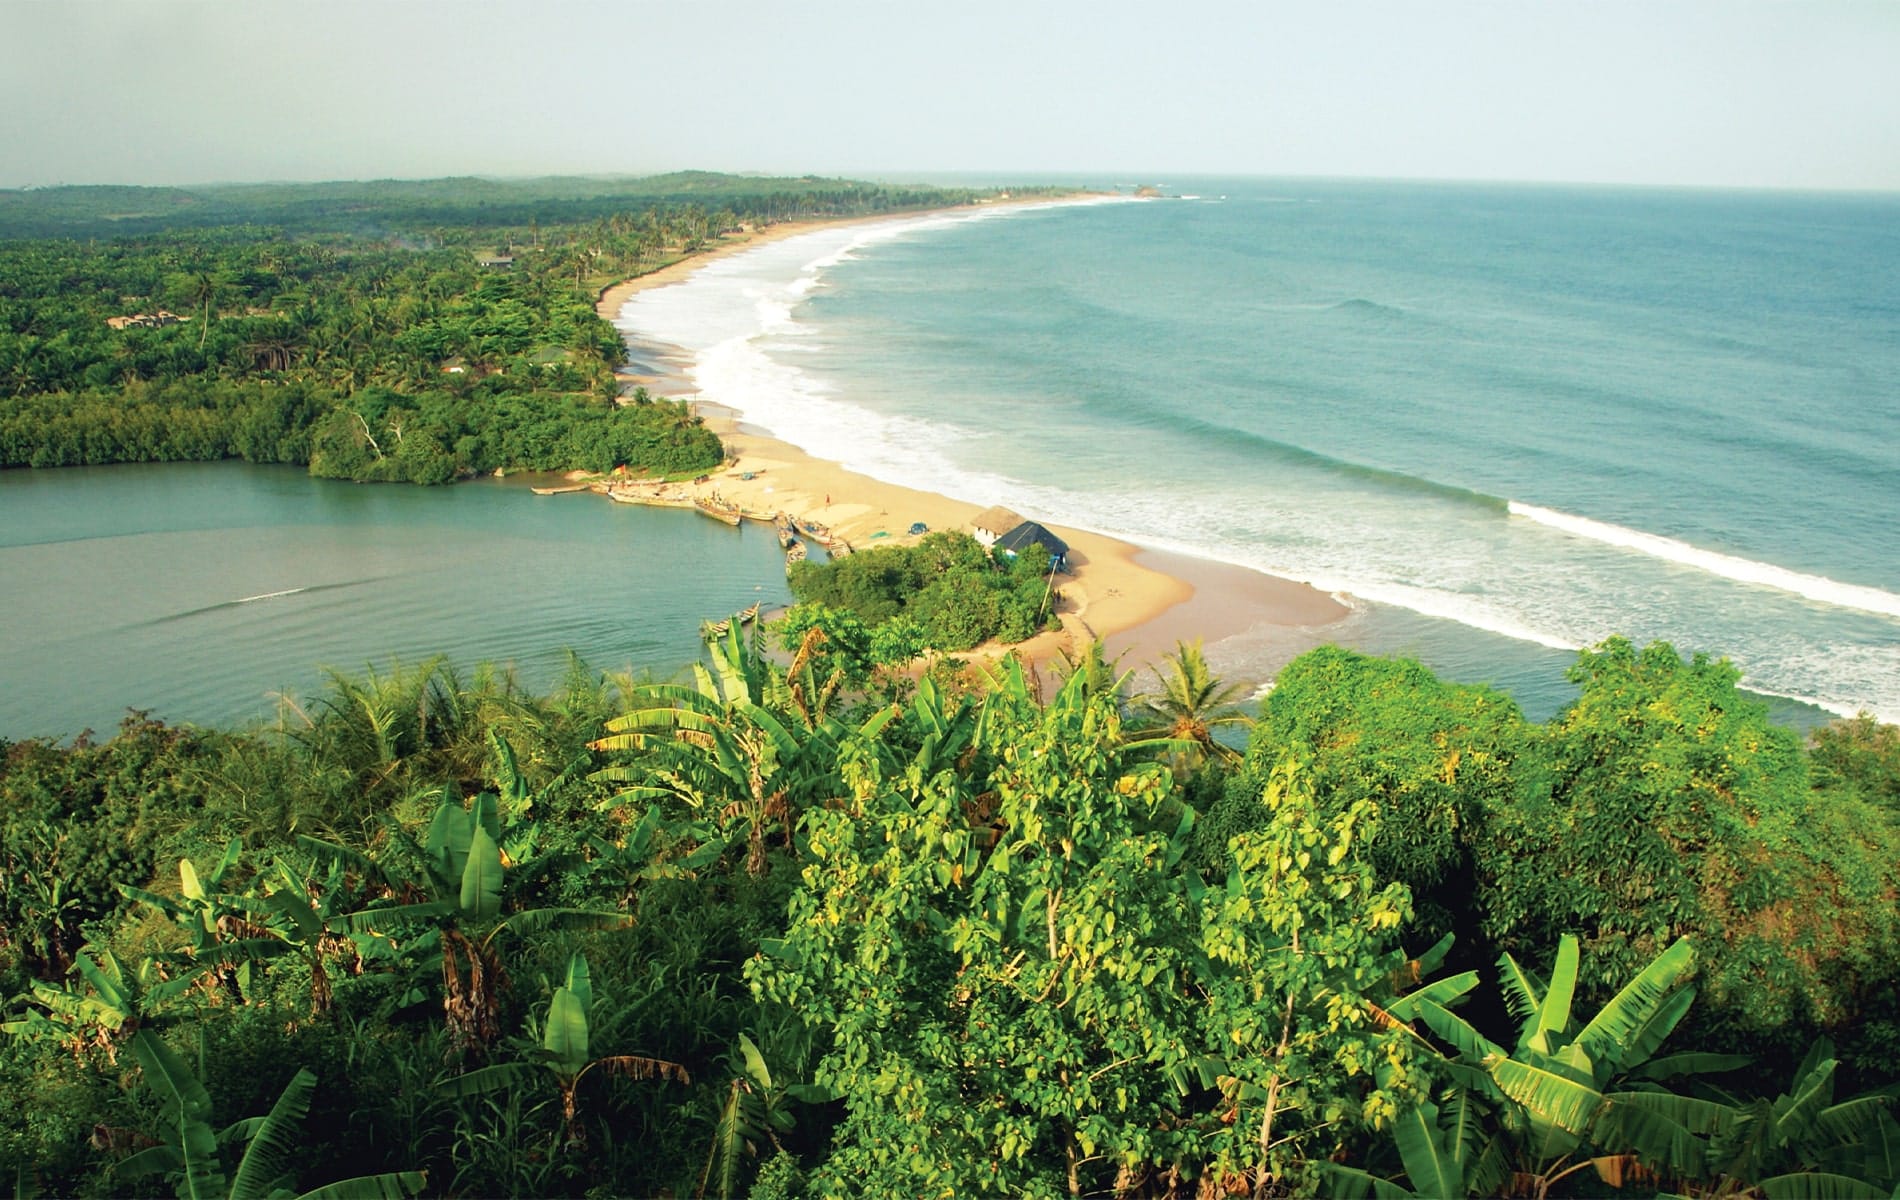 The coastline of Ghana on the Gulf of Guinea, where writer Suzanne Pollak lived for a period during her childhood